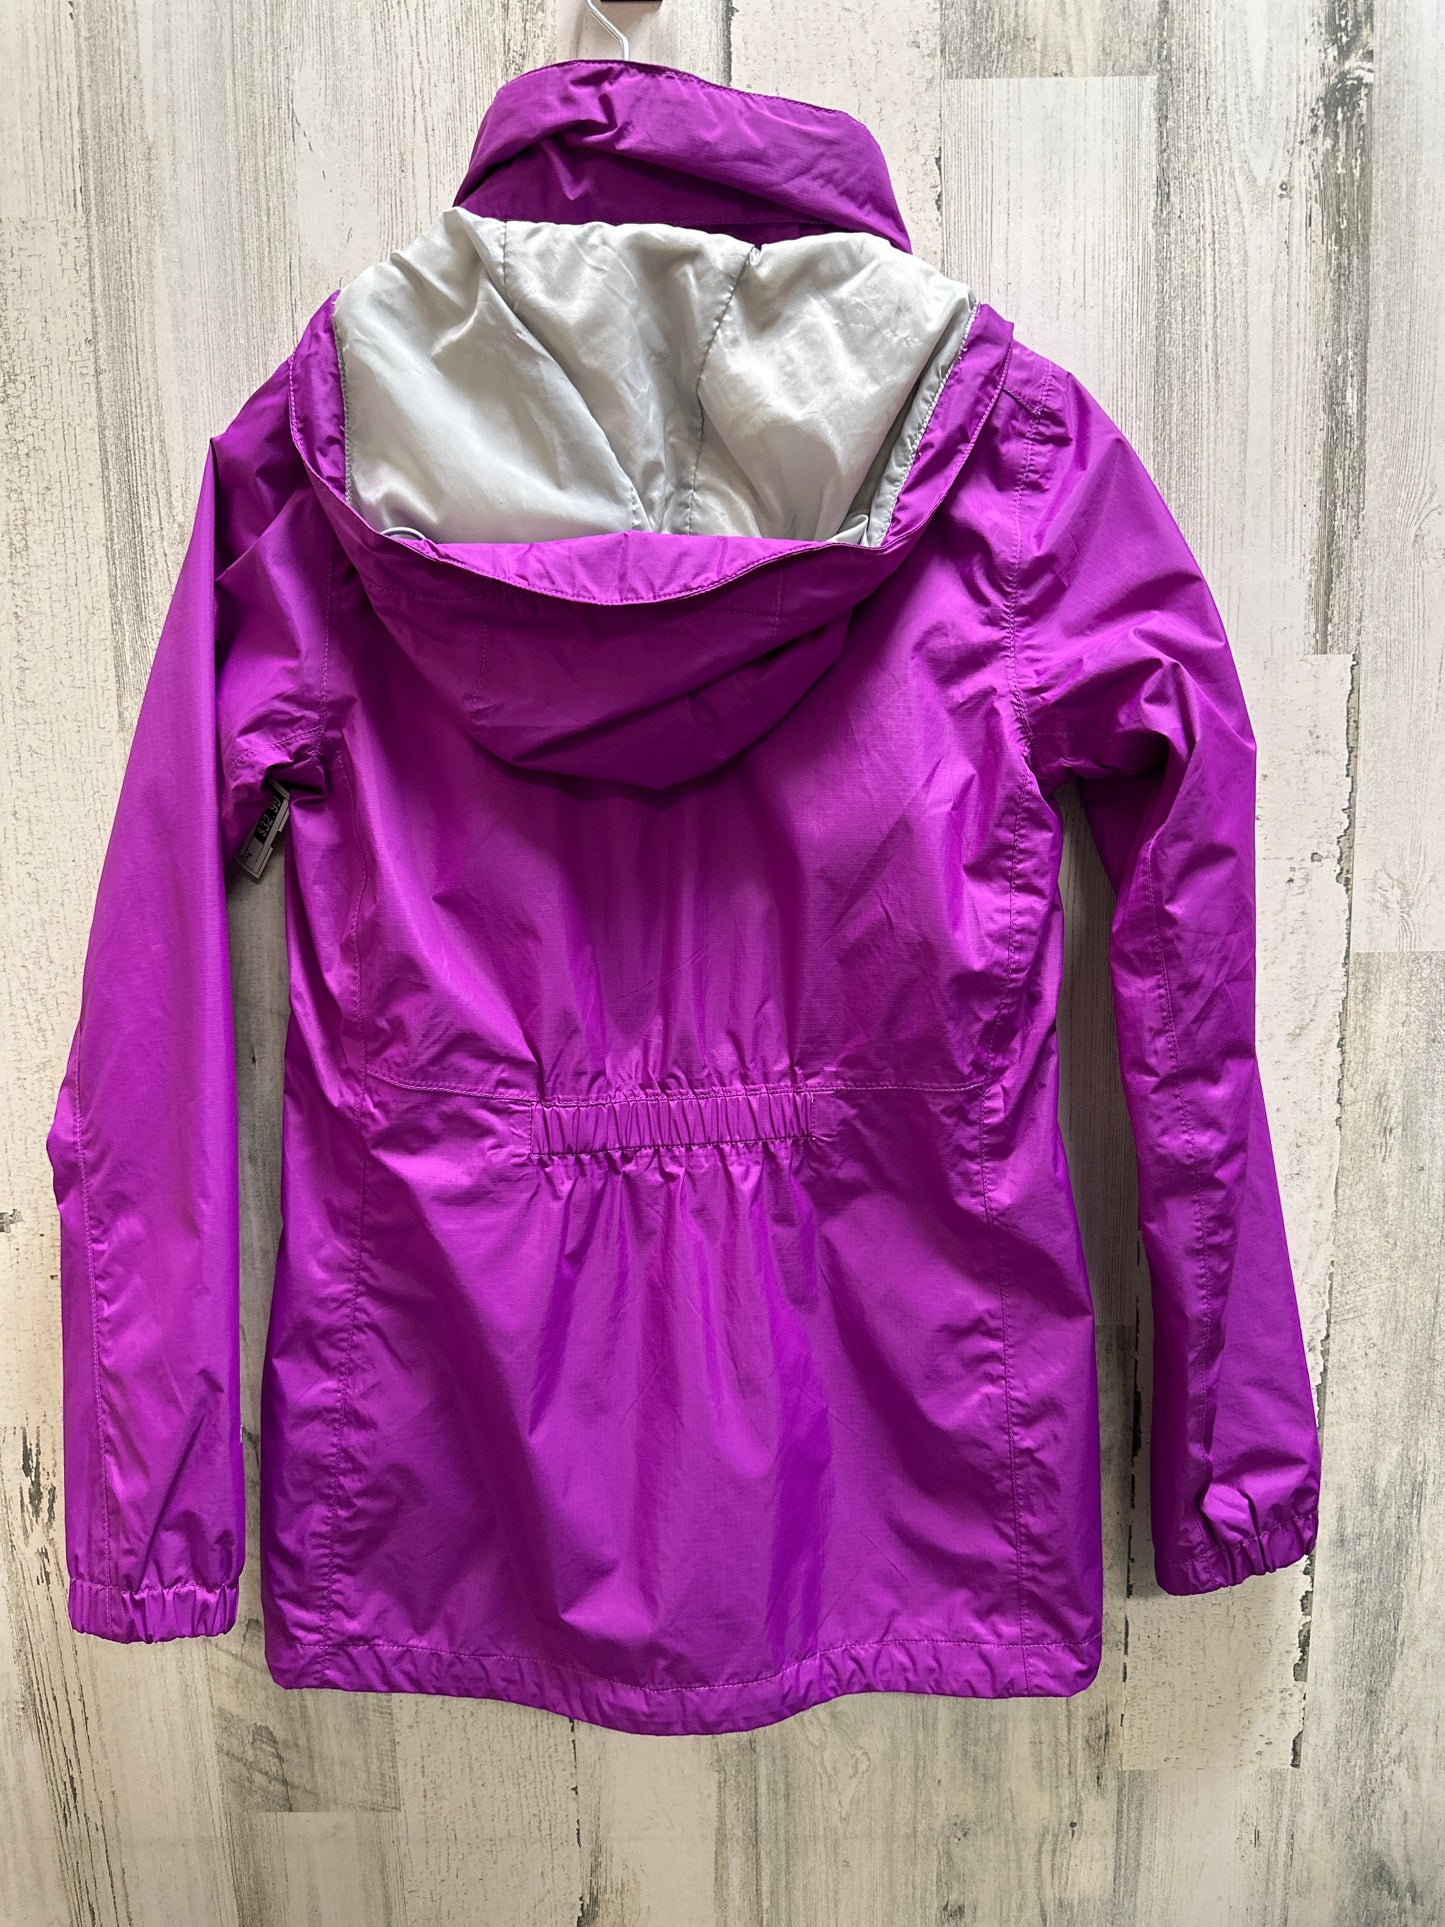 Coat Raincoat By North Face  Size: S